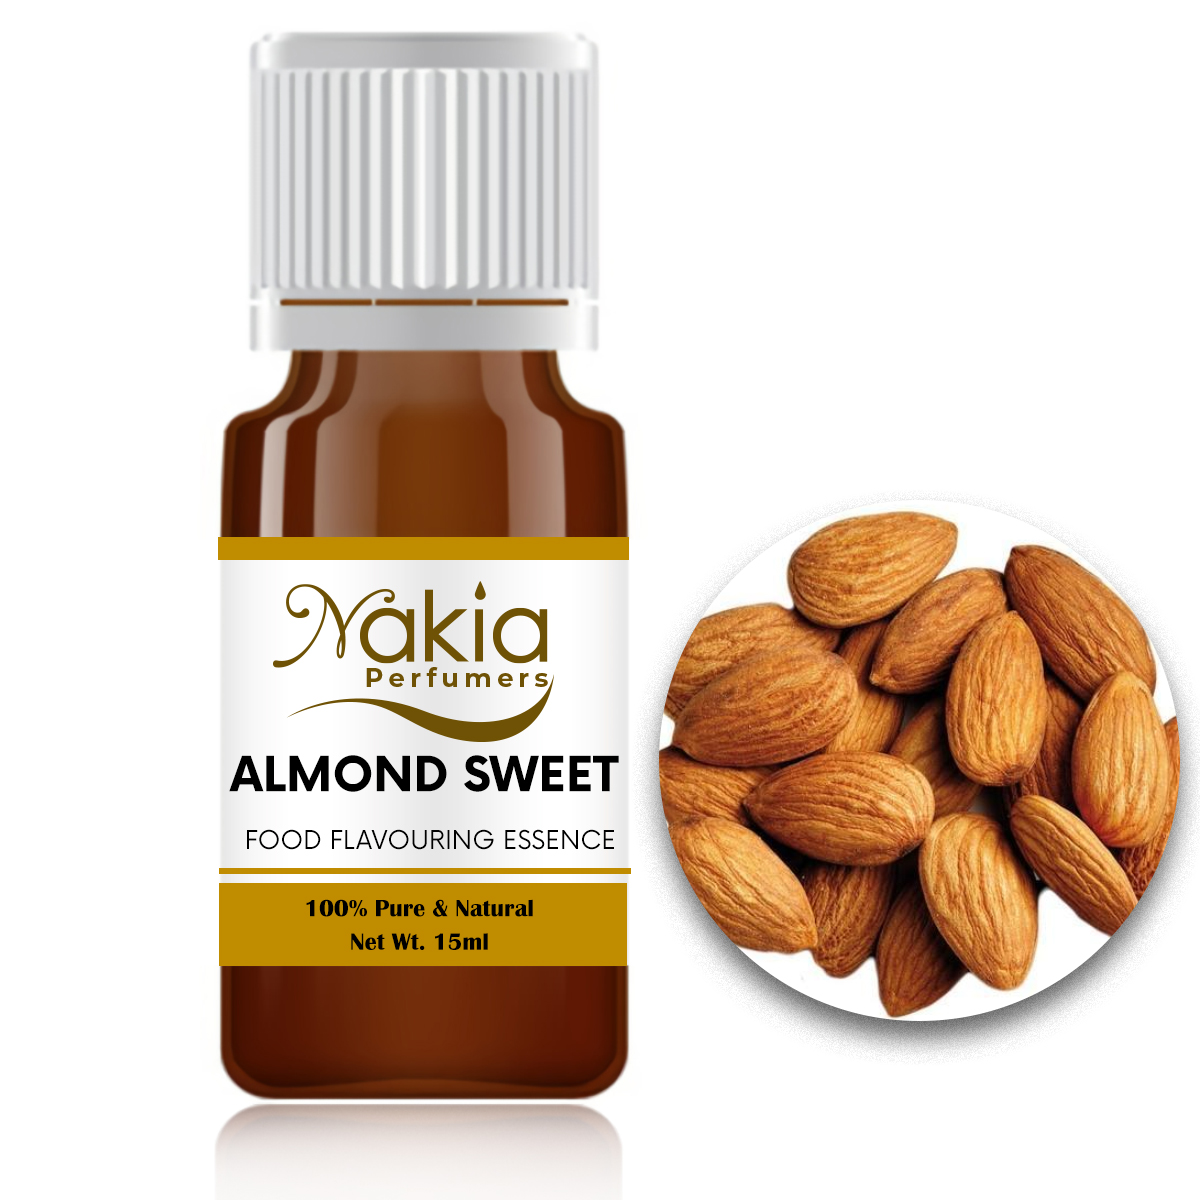 ALMOND SWEET FOOD FLAVOURING ESSENCE